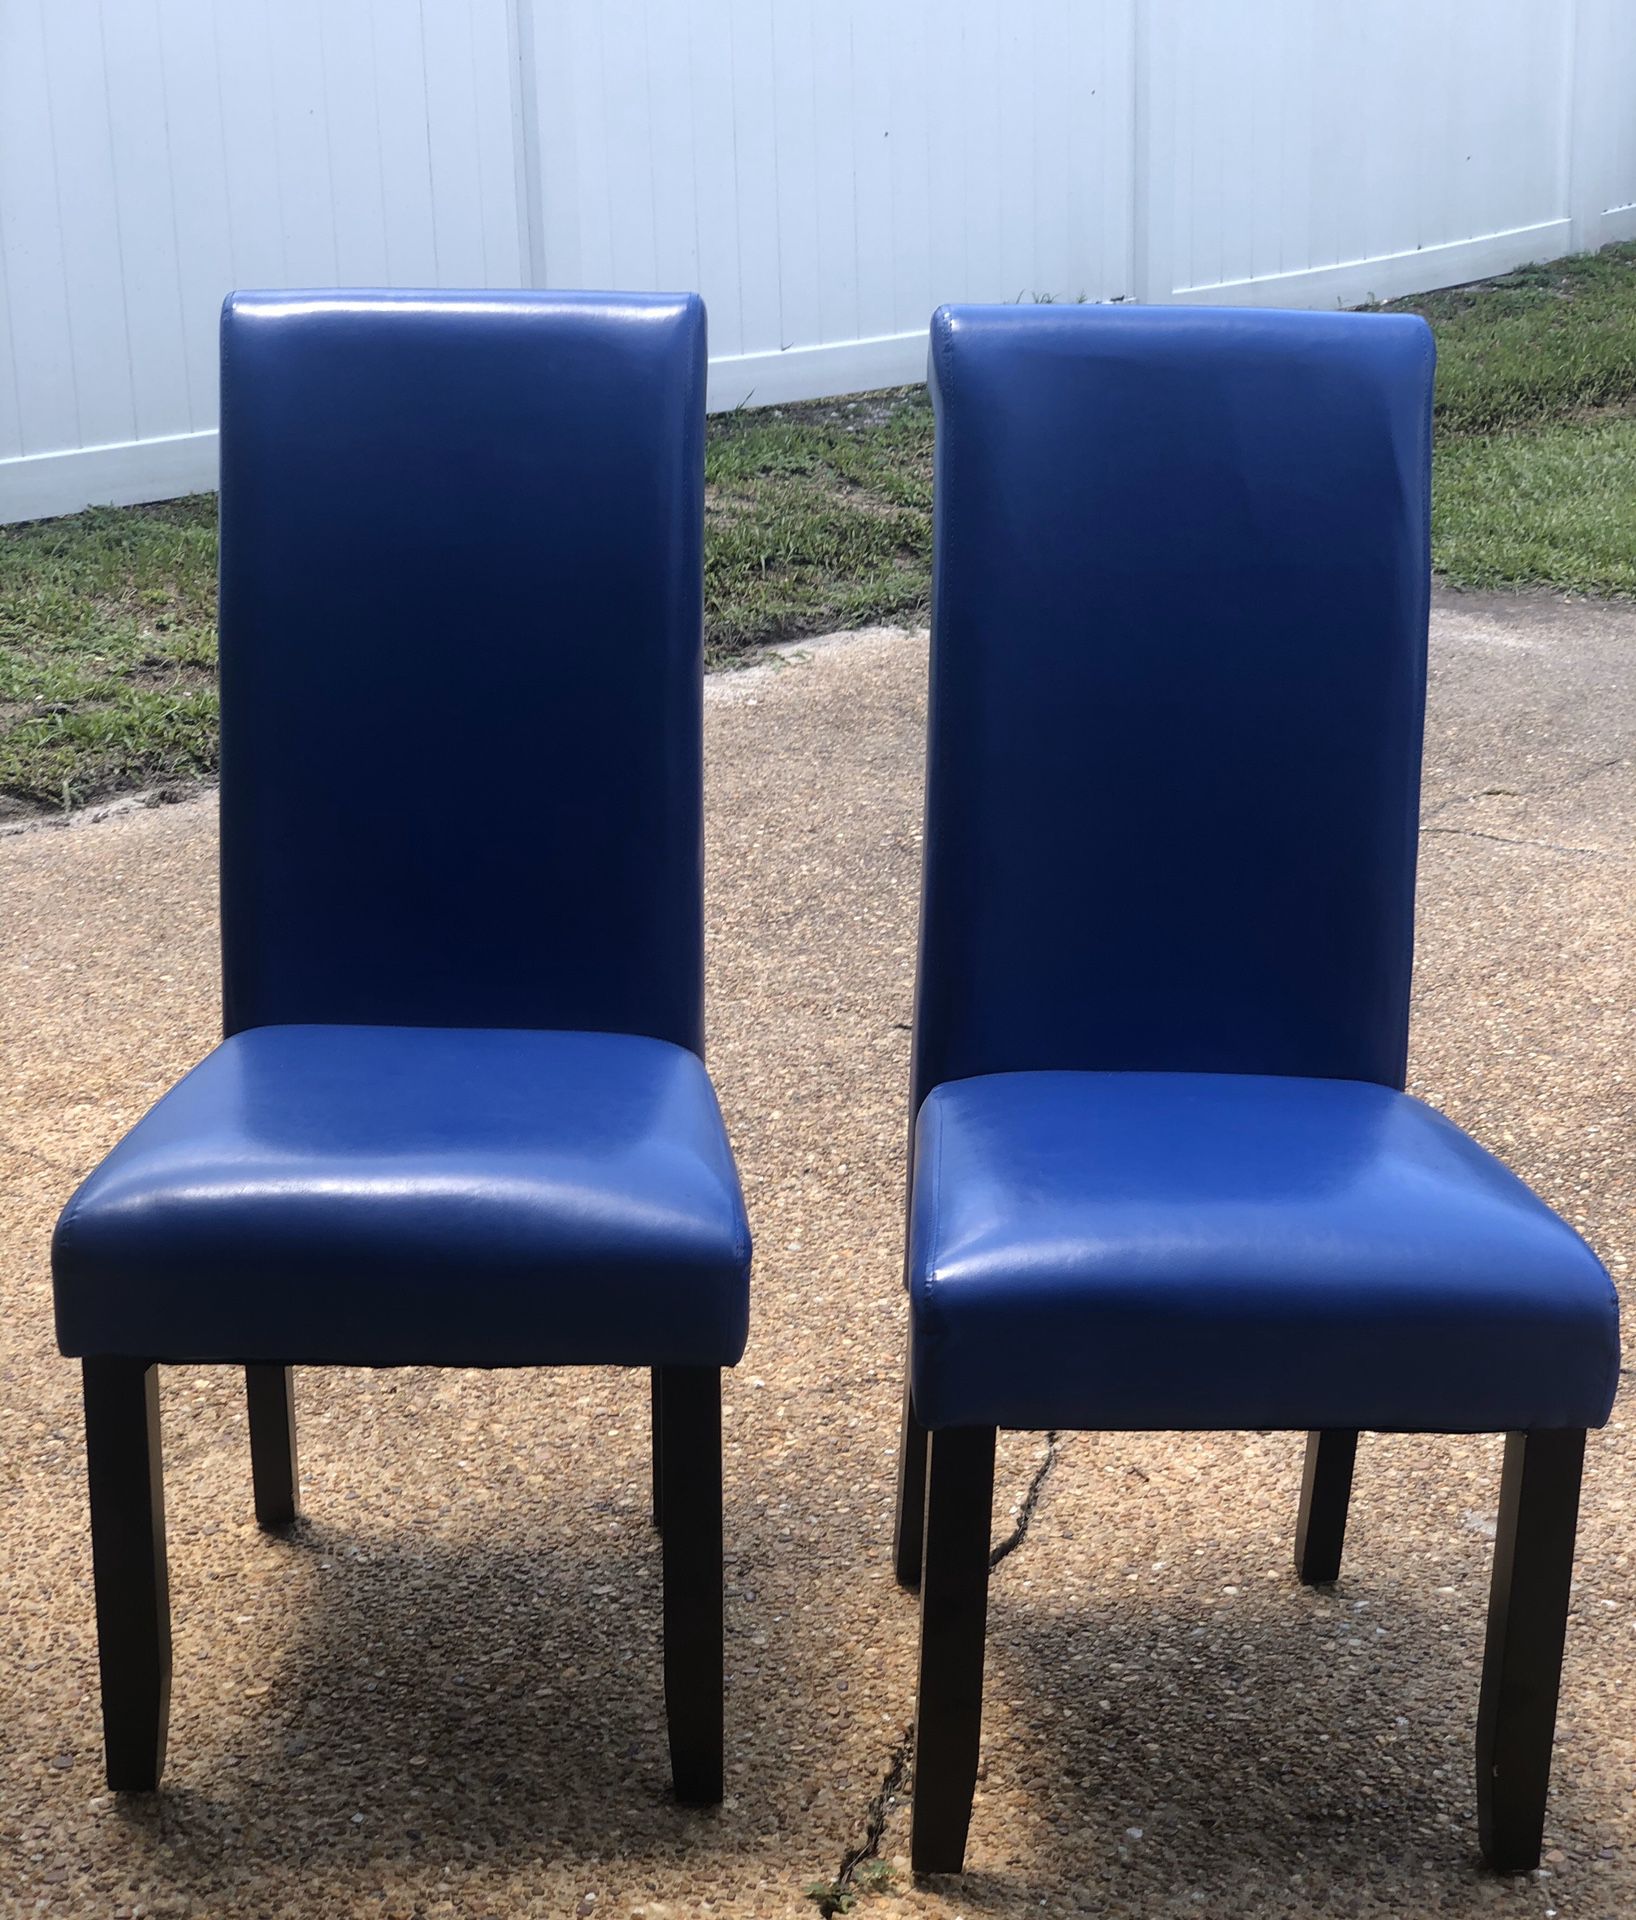 2 Blue Dining Chairs